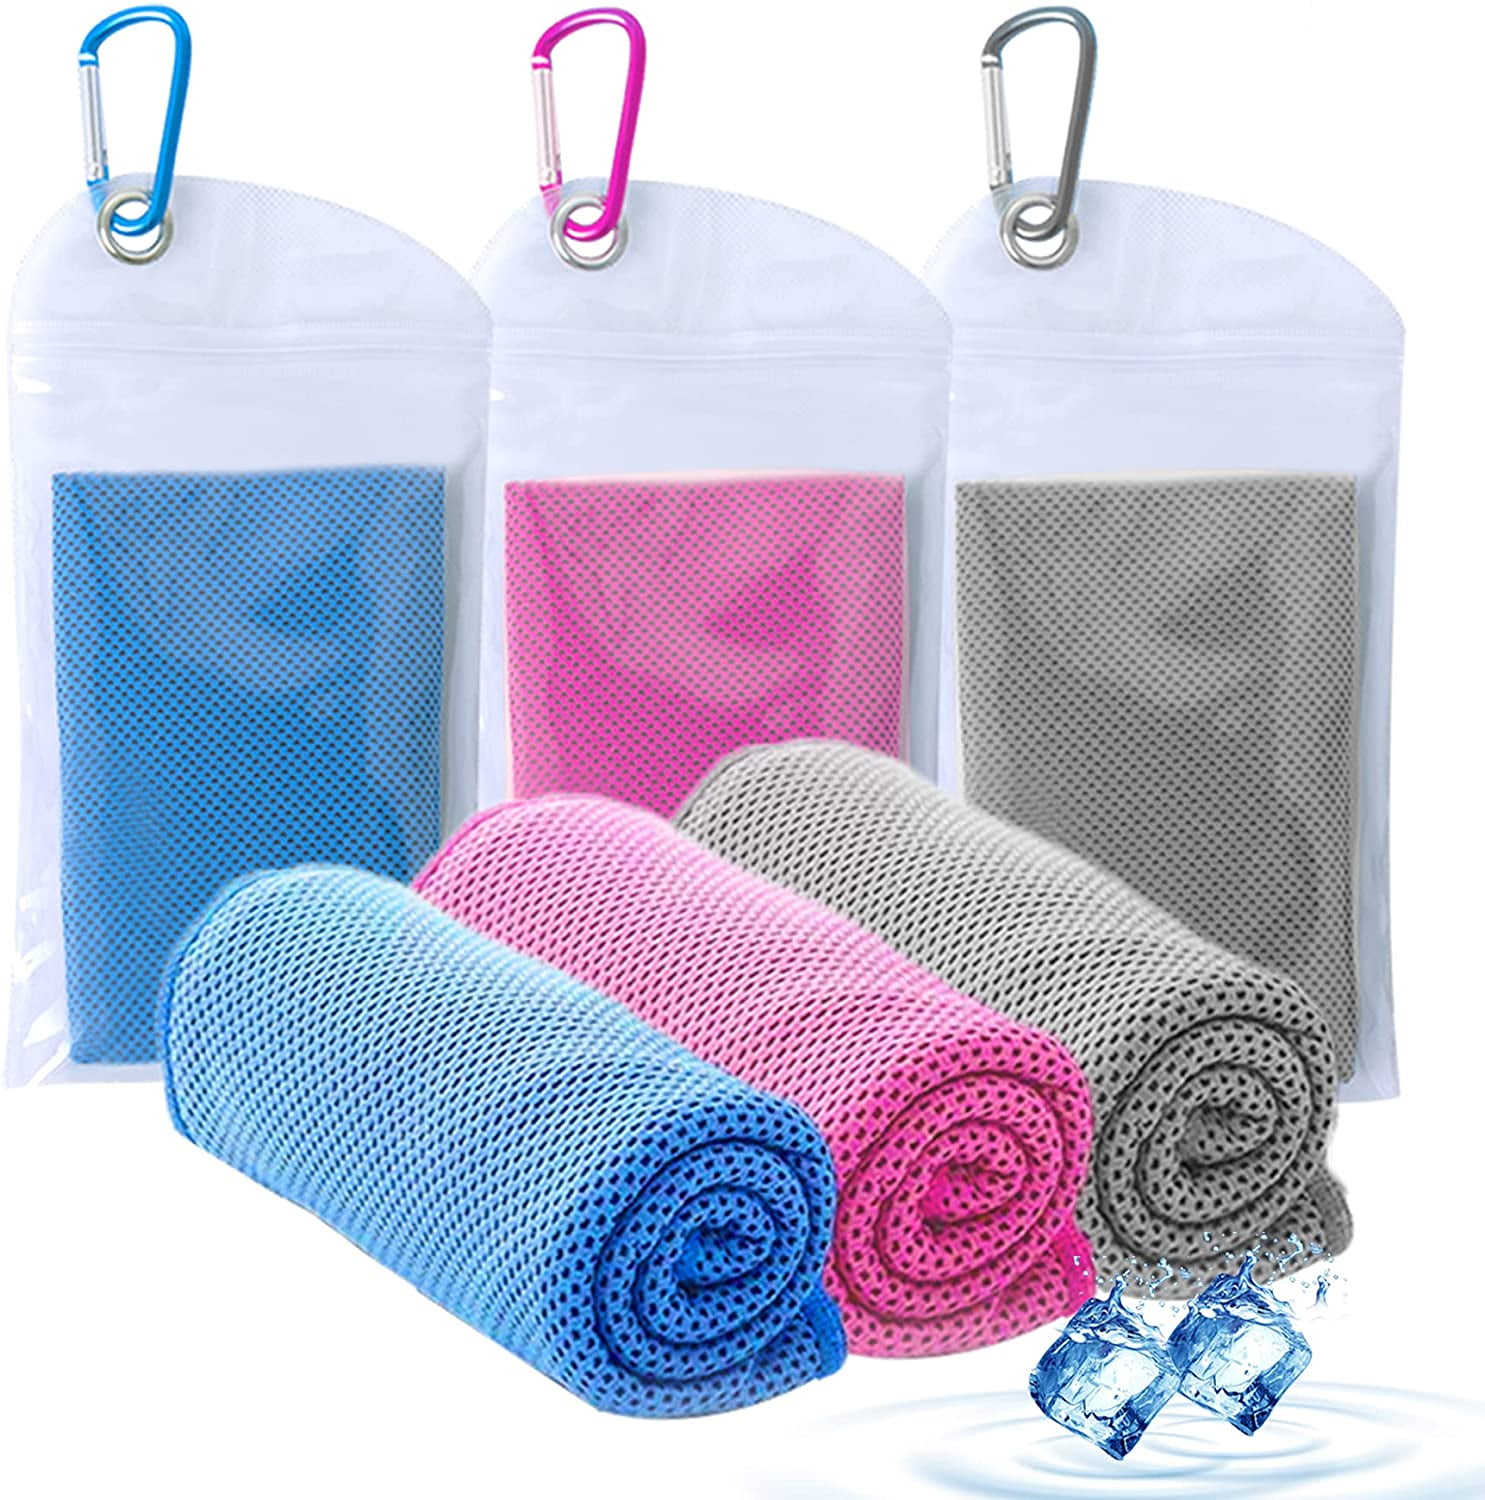 Sports Cooling Towel Soft Absorbent Quick Dry Workout Fitness Gym Towel 1PC 